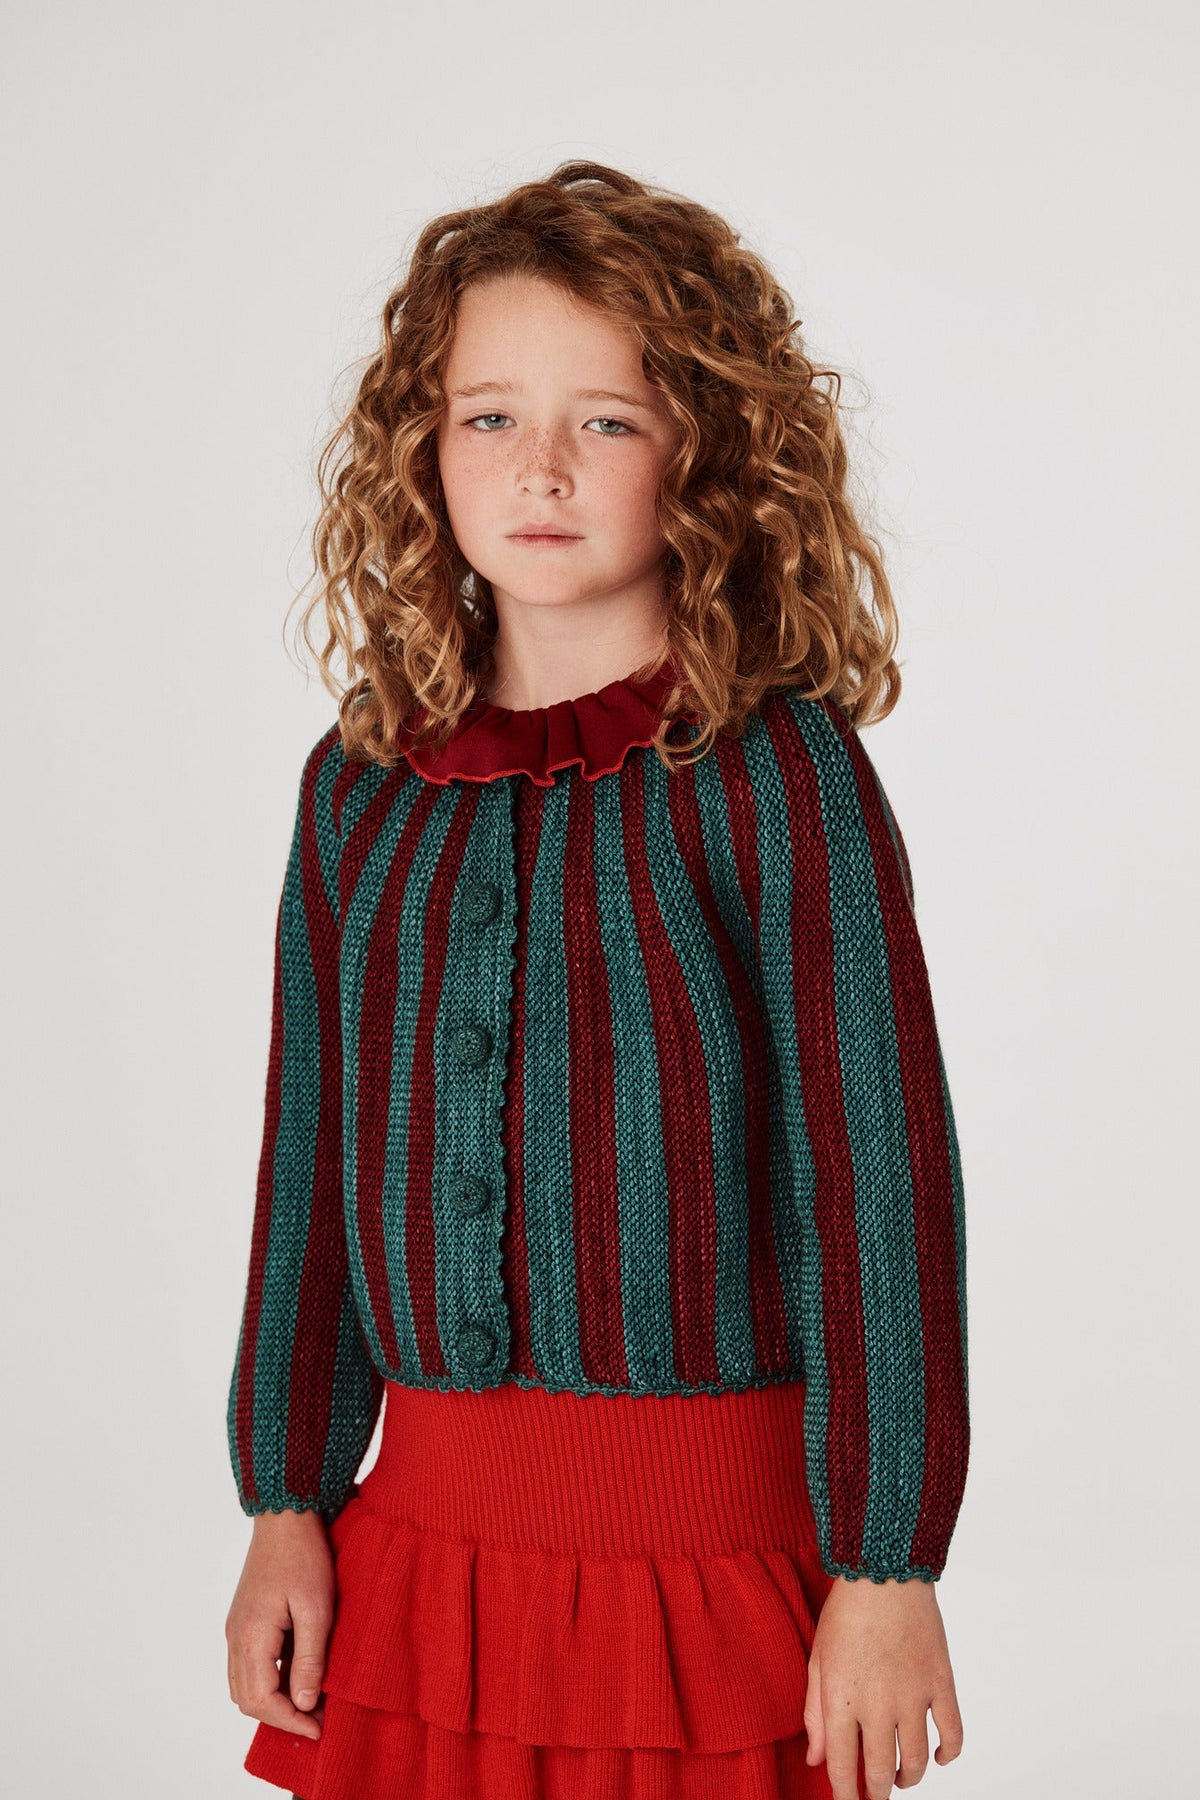 Short Circus Cardigan - Peacock+Model is 53 inches tall, 58lbs, wearing a size 7-8y